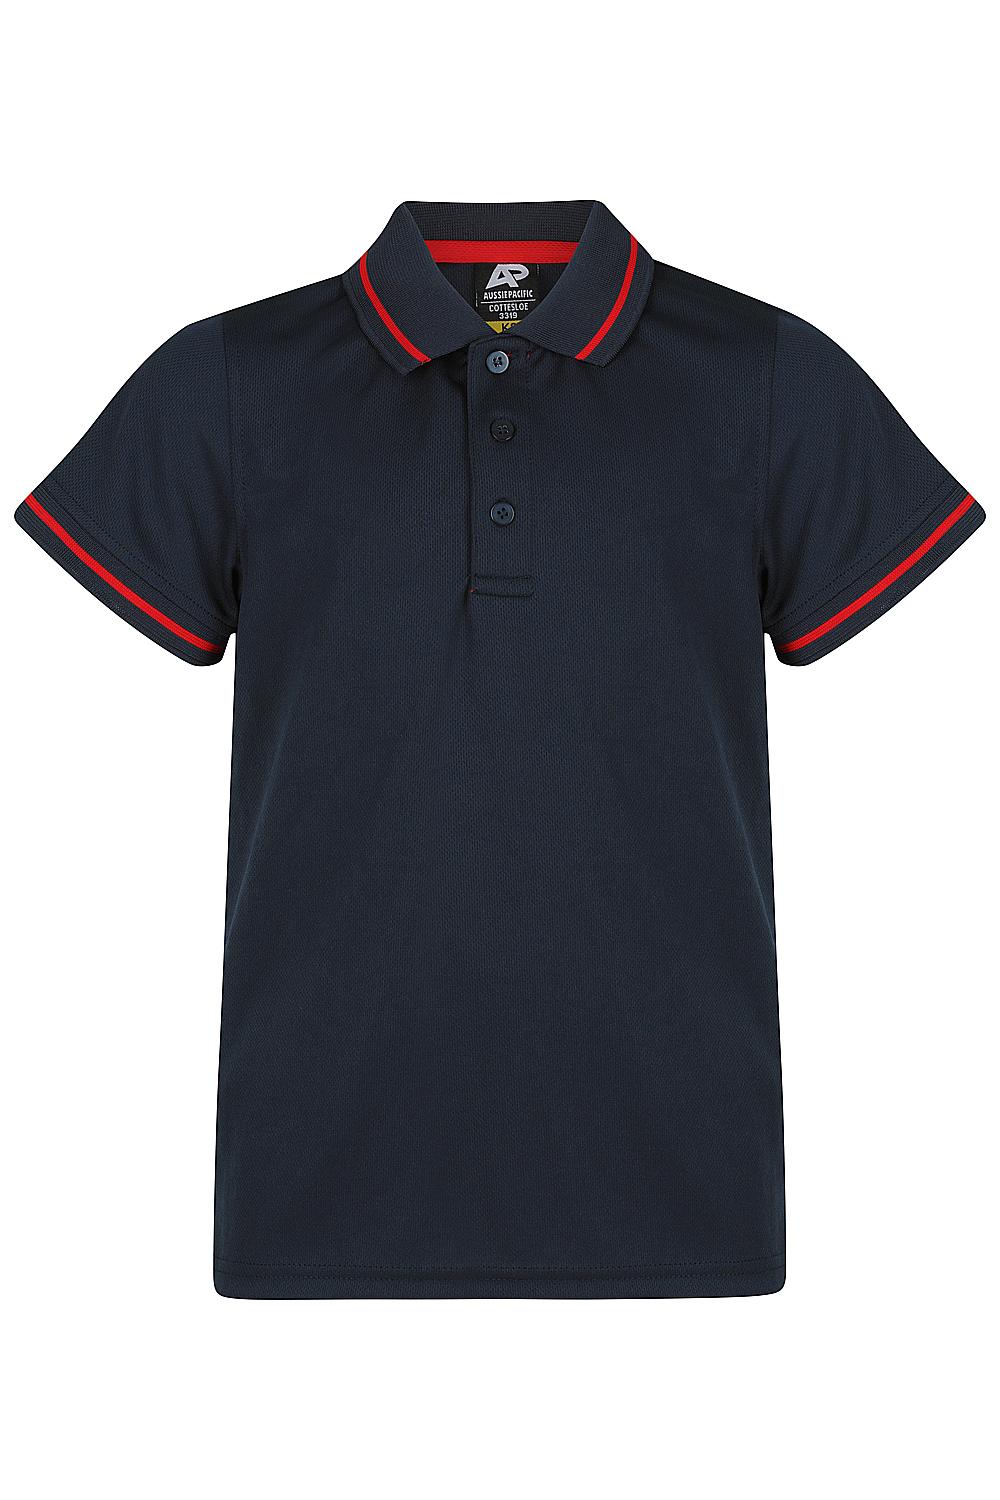 Cottesloe Polos | Custom Kids Shirts 🔥 Safe-T-Rex Workwear - Navy/Red